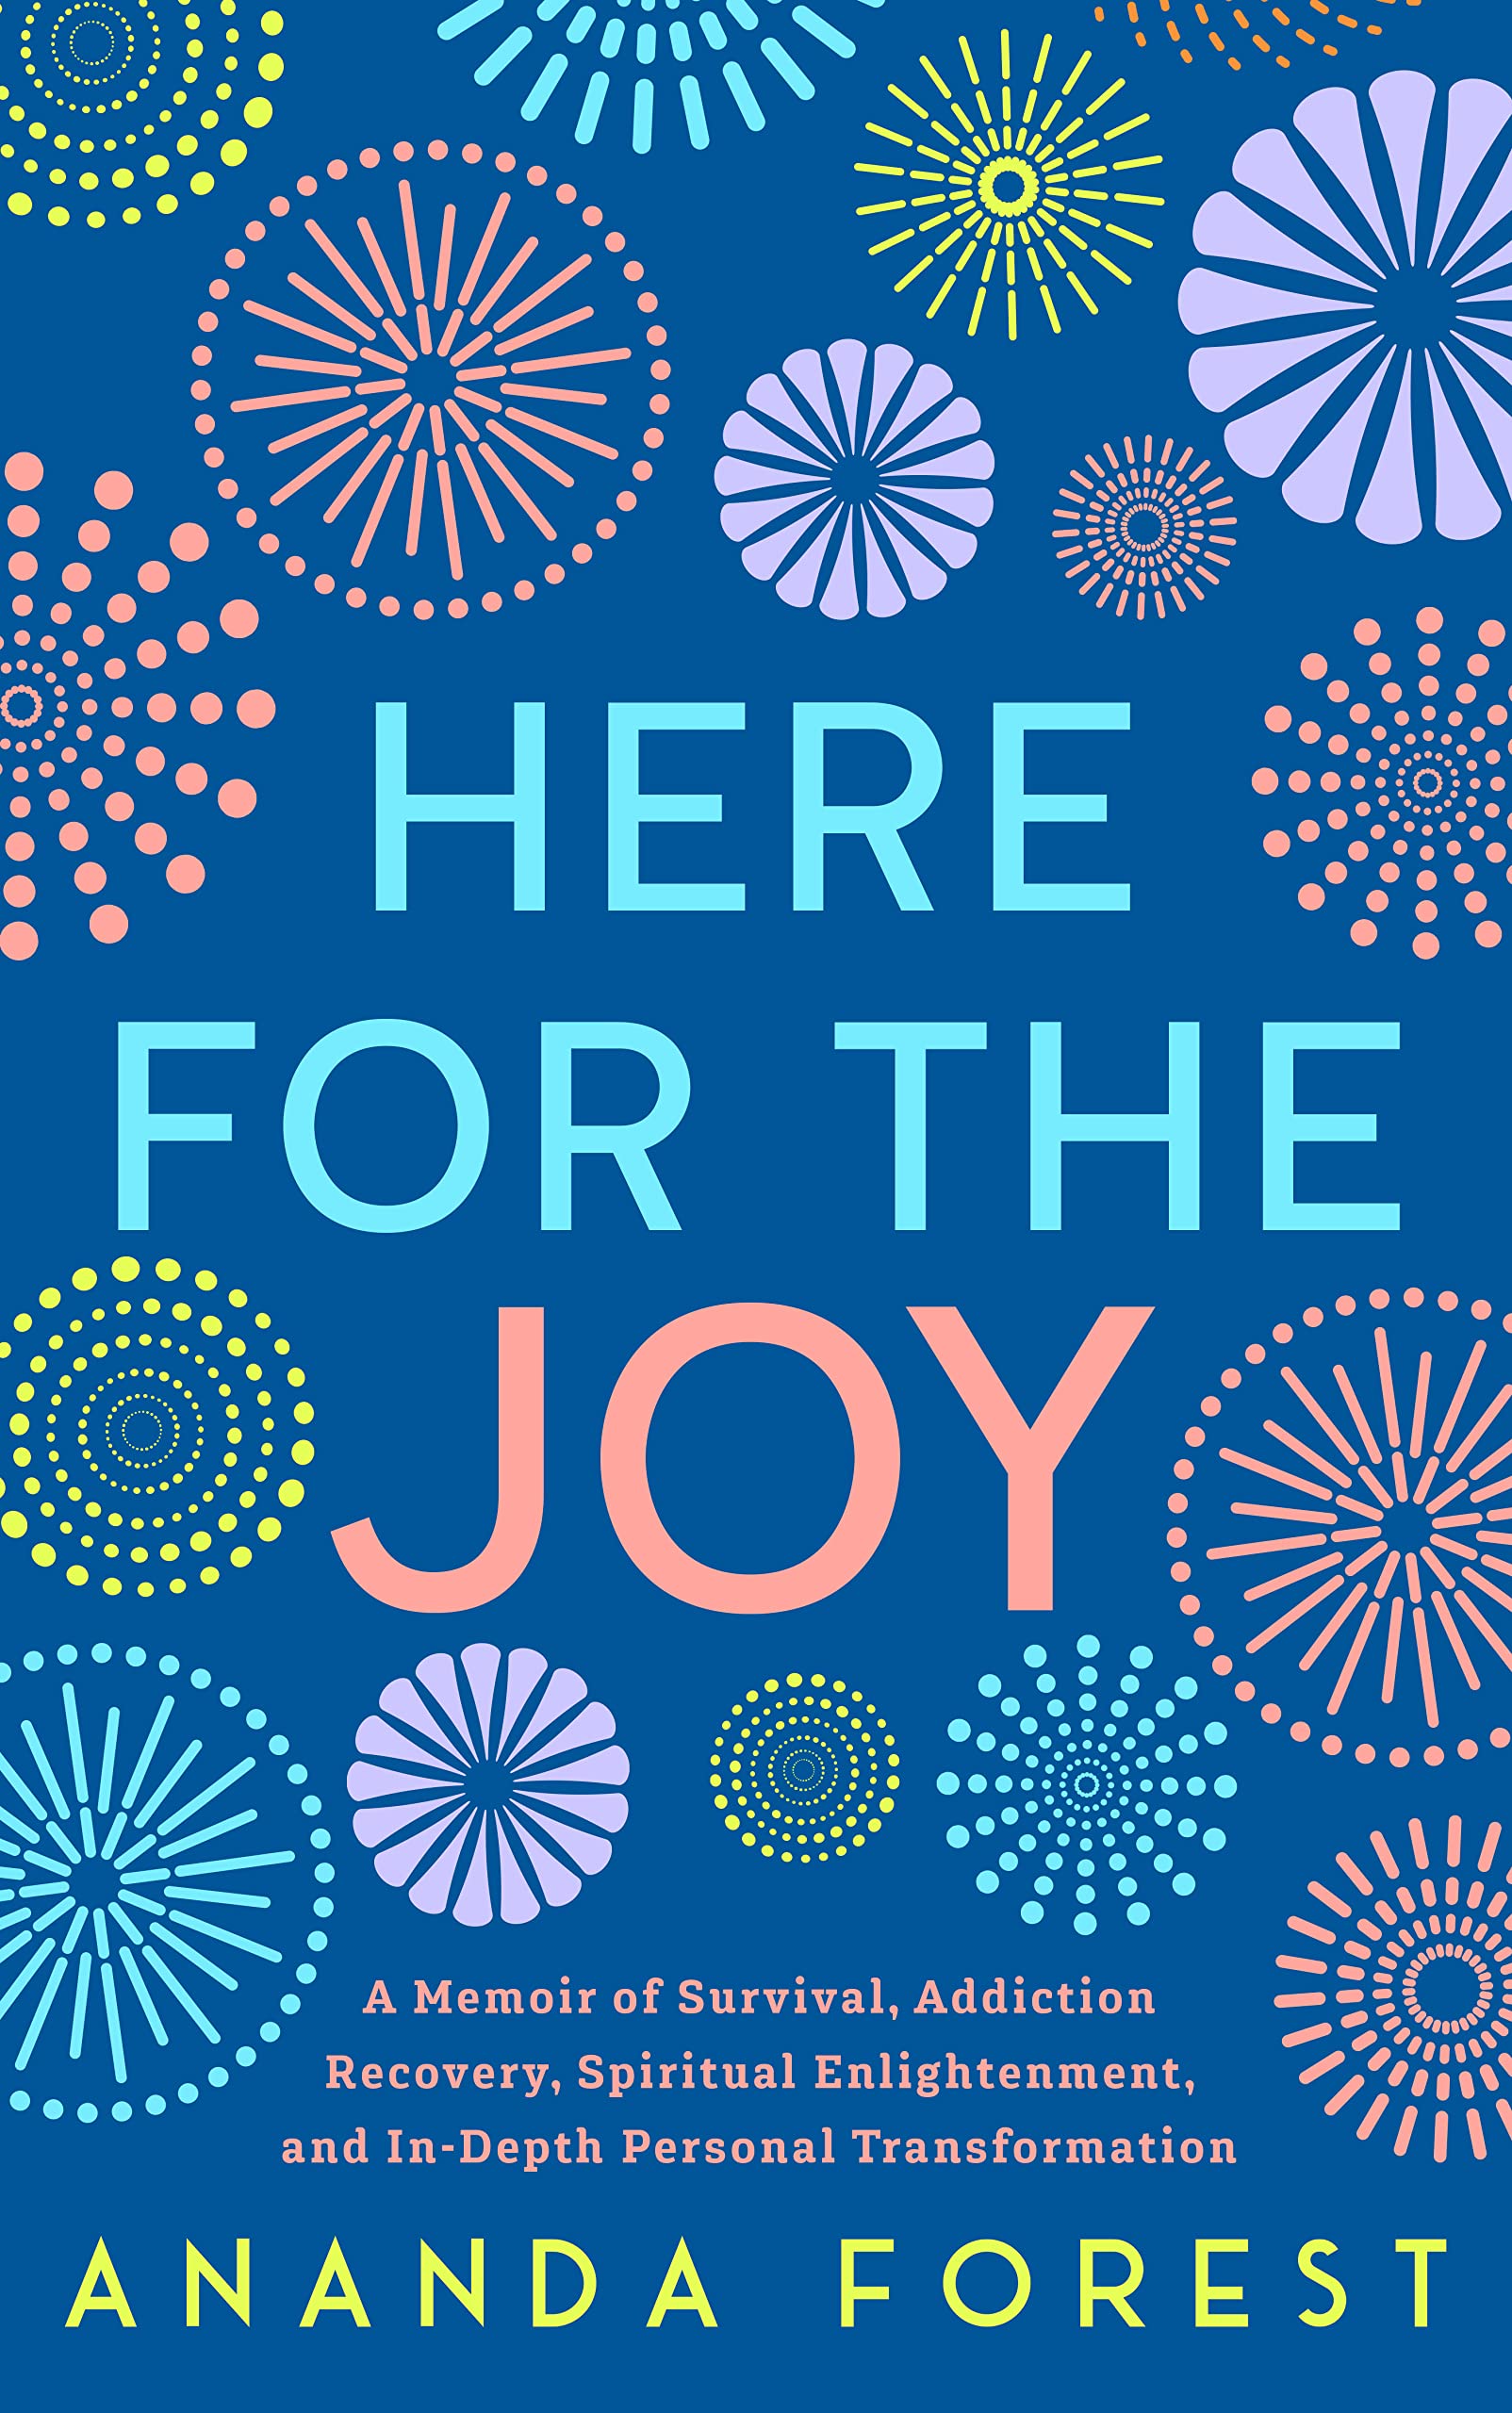 HERE FOR THE JOY: A Memoir of Survival, Addiction Recovery, Spiritual Enlightenment, and In-Depth Personal Transformation